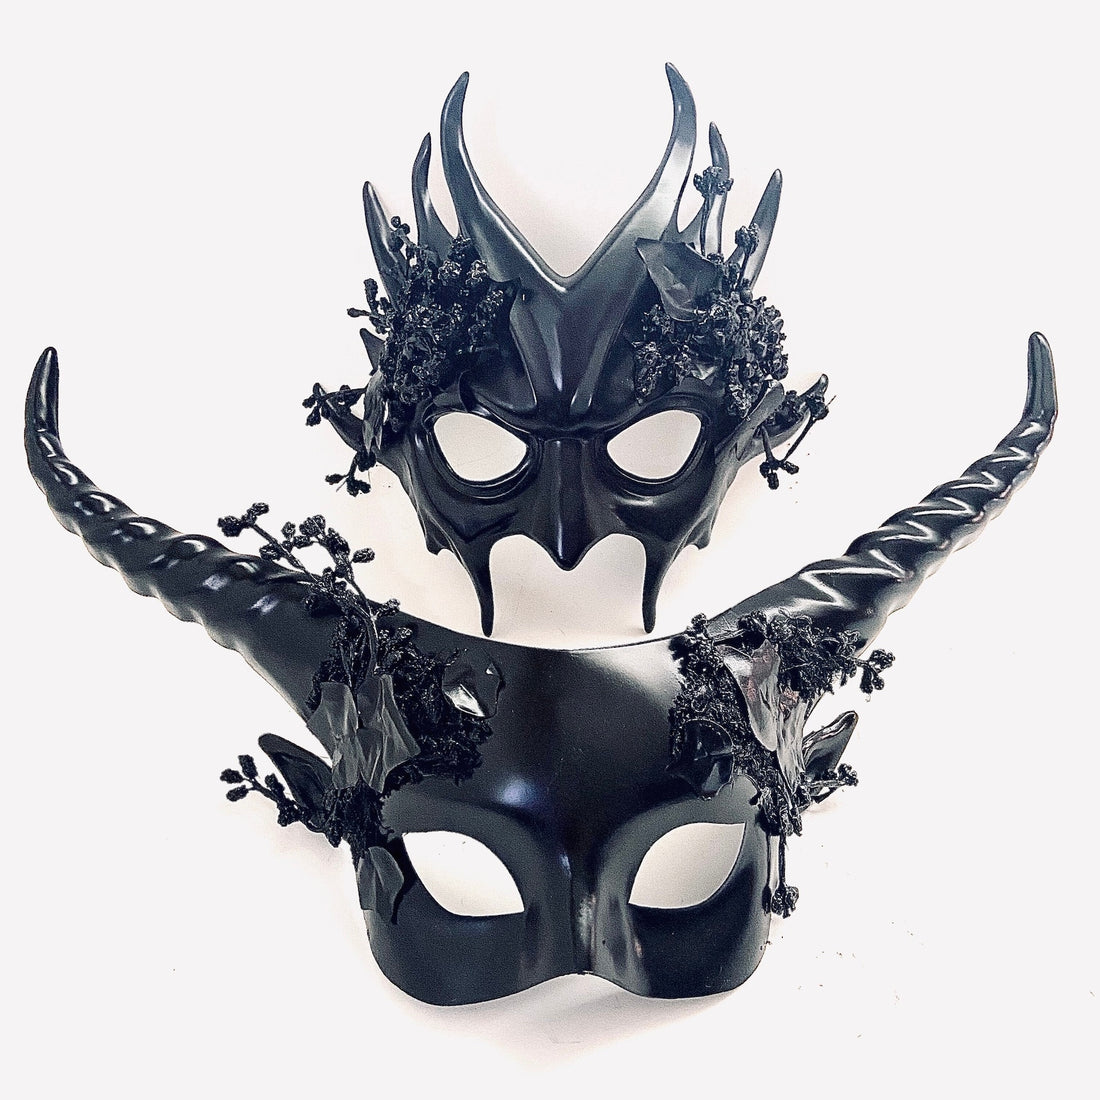 Couples masquerade mask set in black with forest foliage for sale.